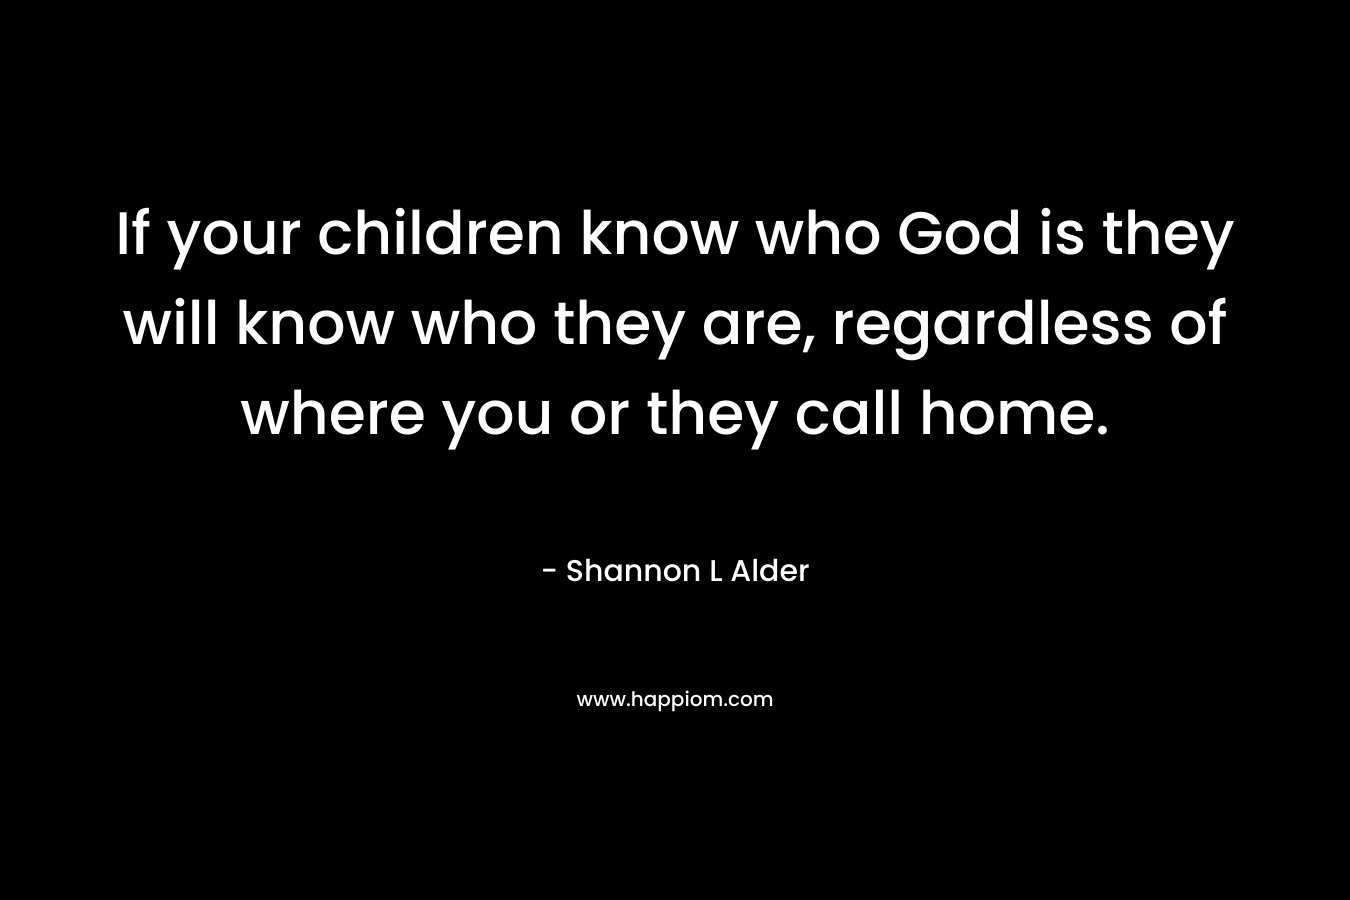 If your children know who God is they will know who they are, regardless of where you or they call home.